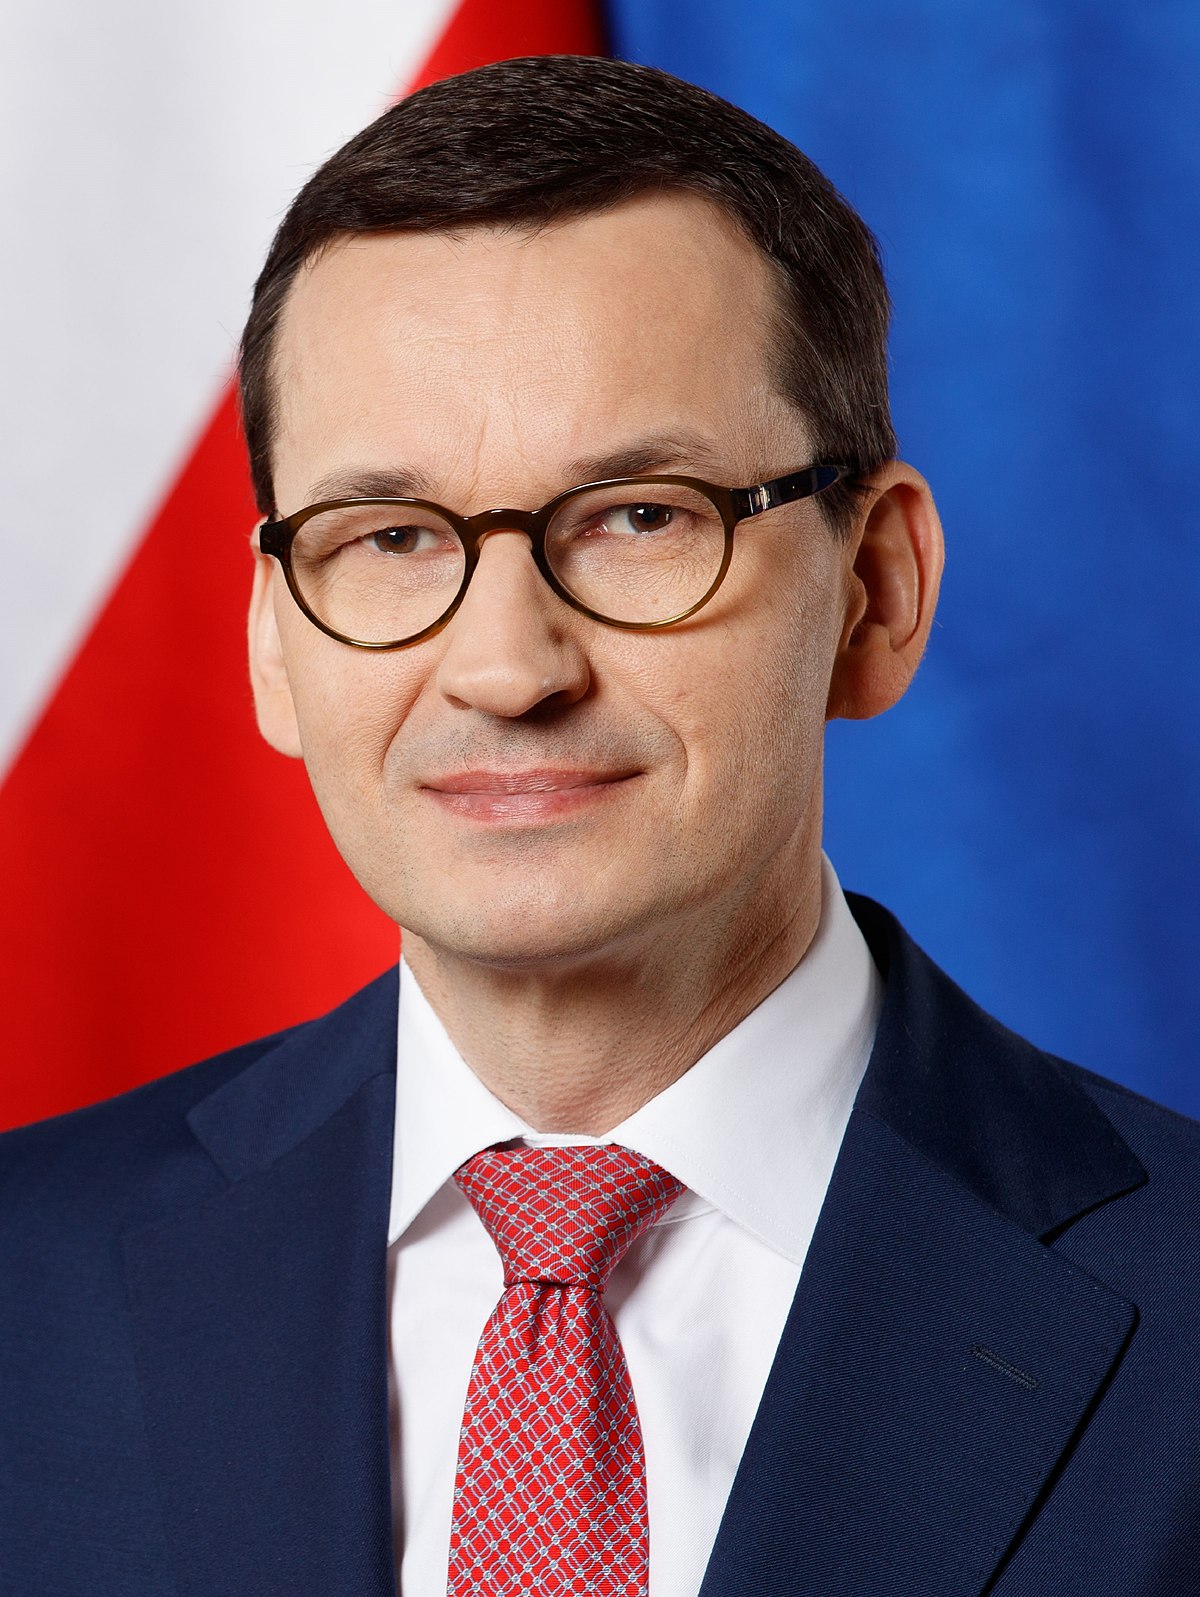 Poland could send Leopard tanks to Ukraine without Berlin's approval - Polish PM